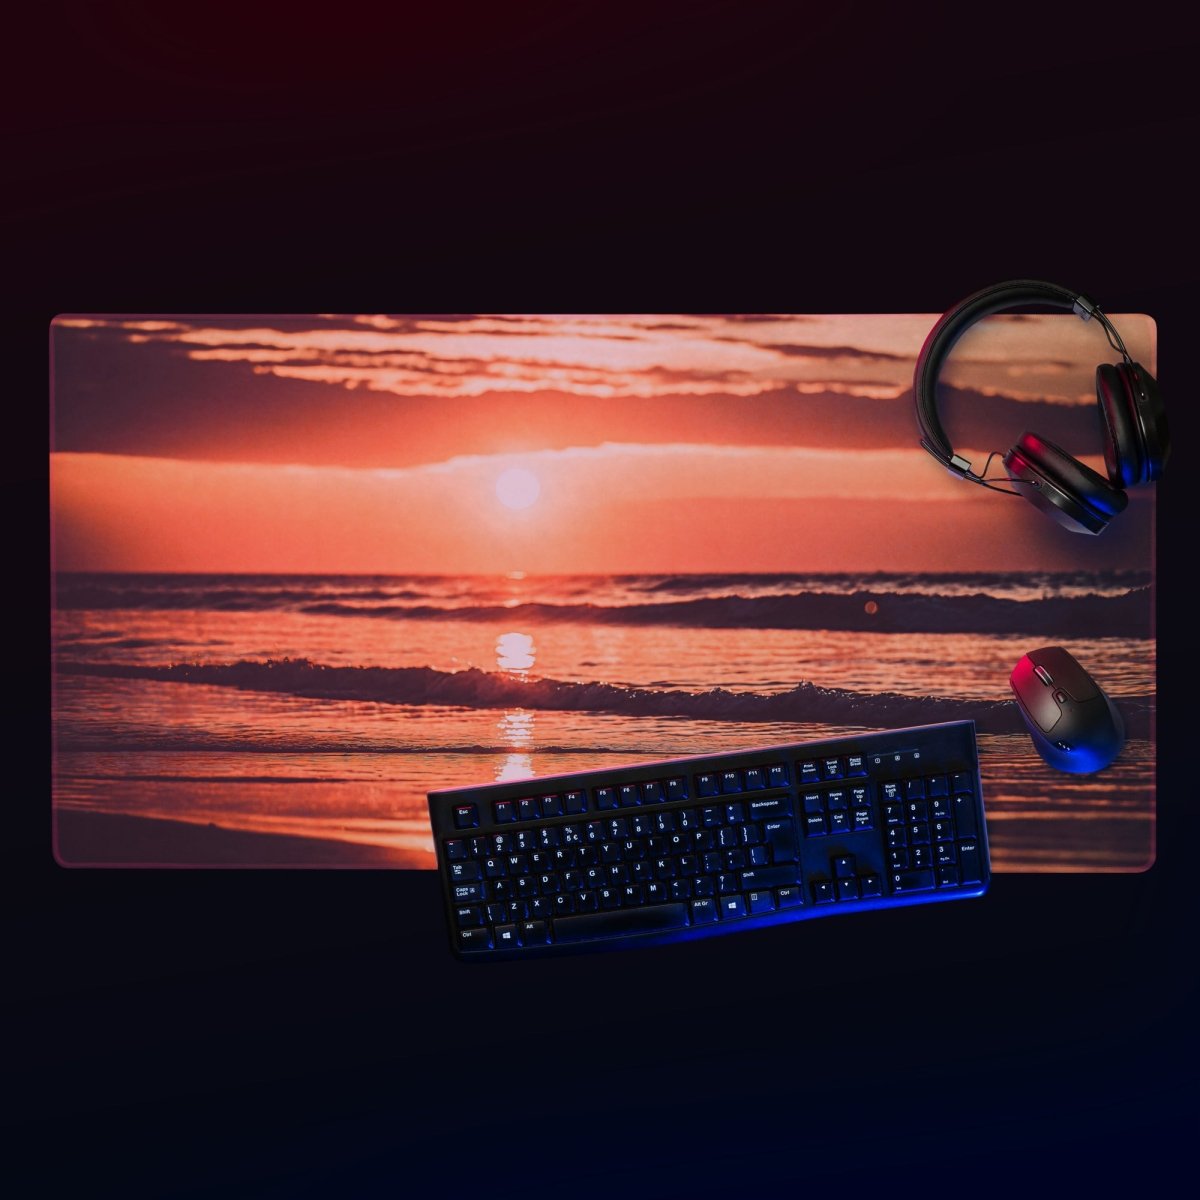 Crimson tide - Gaming mouse pad - Ever colorful